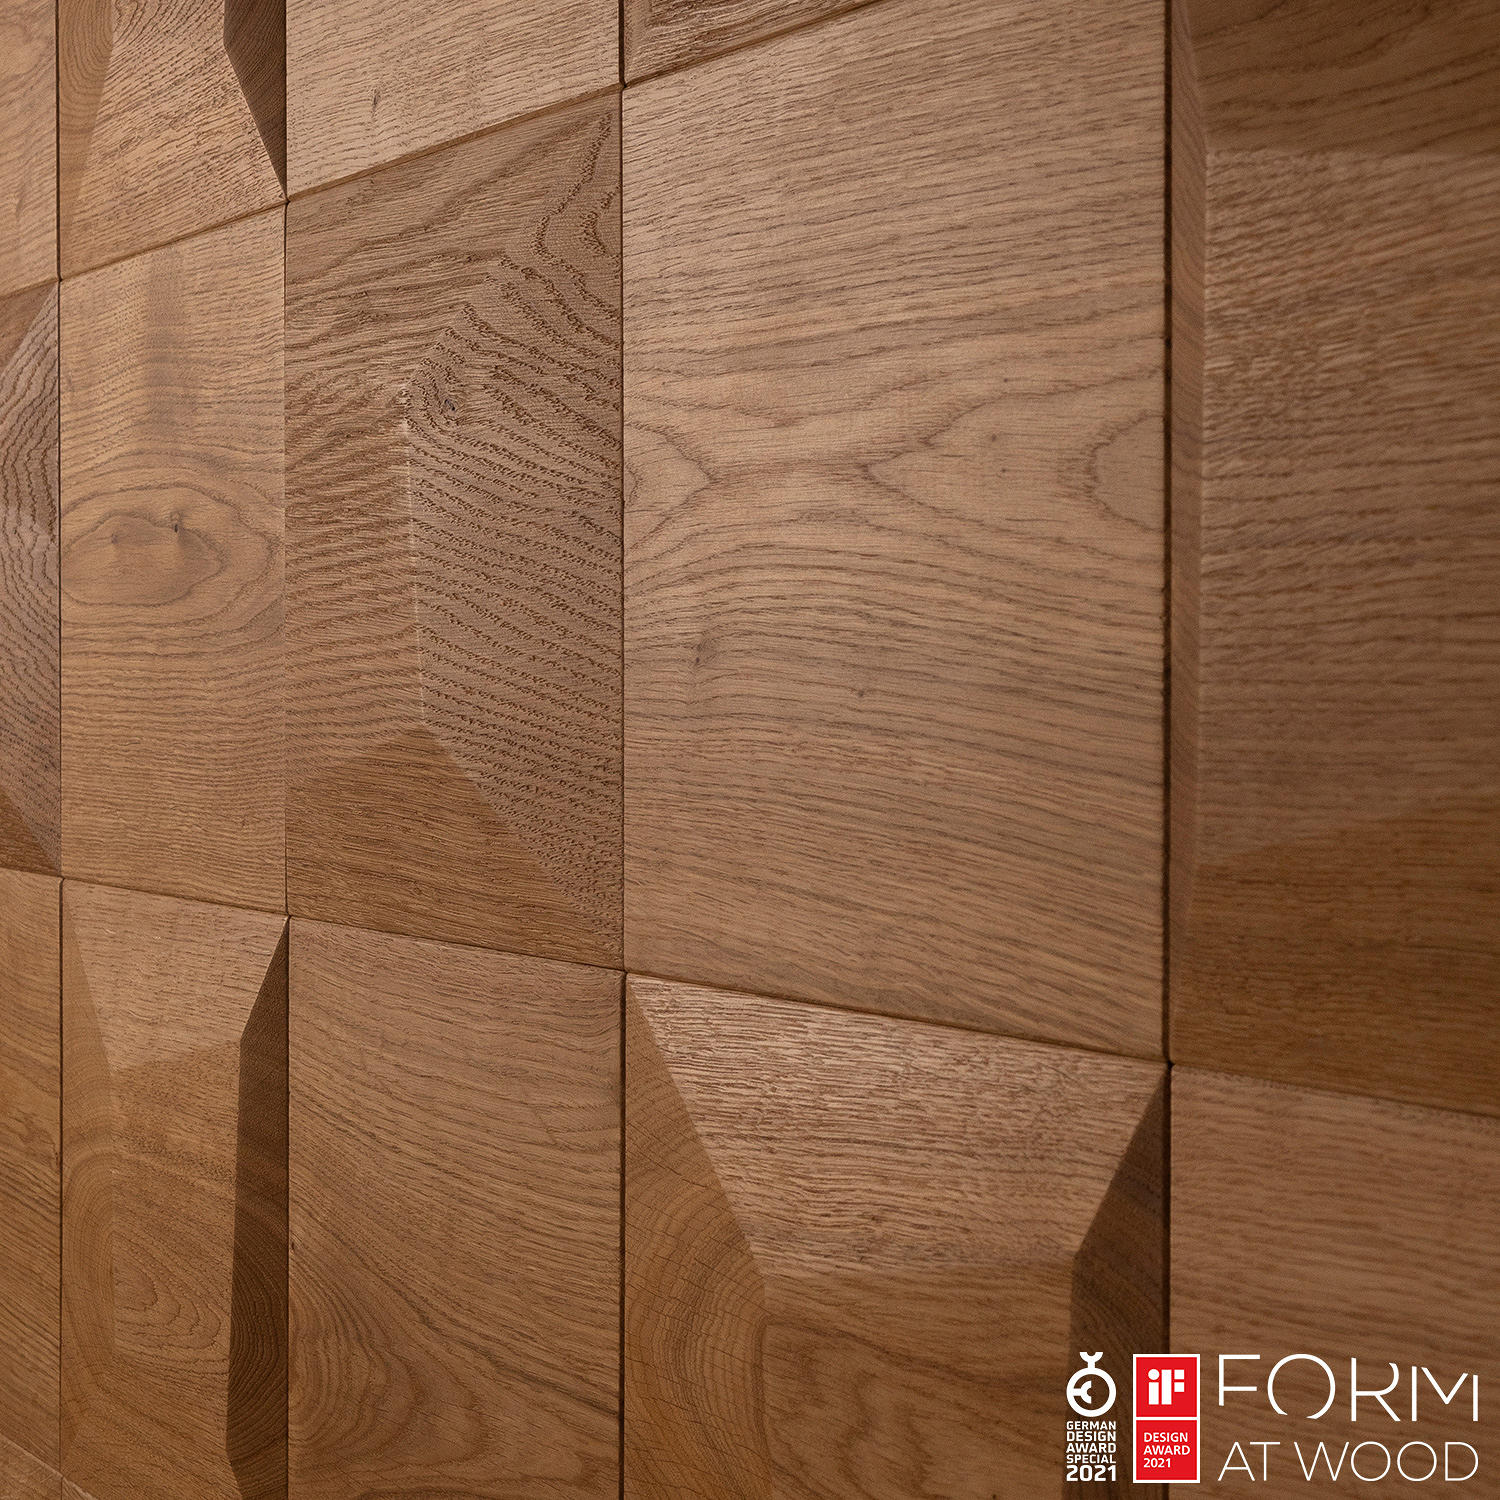 FLAT SQUARE - Wood tiles from Form at Wood